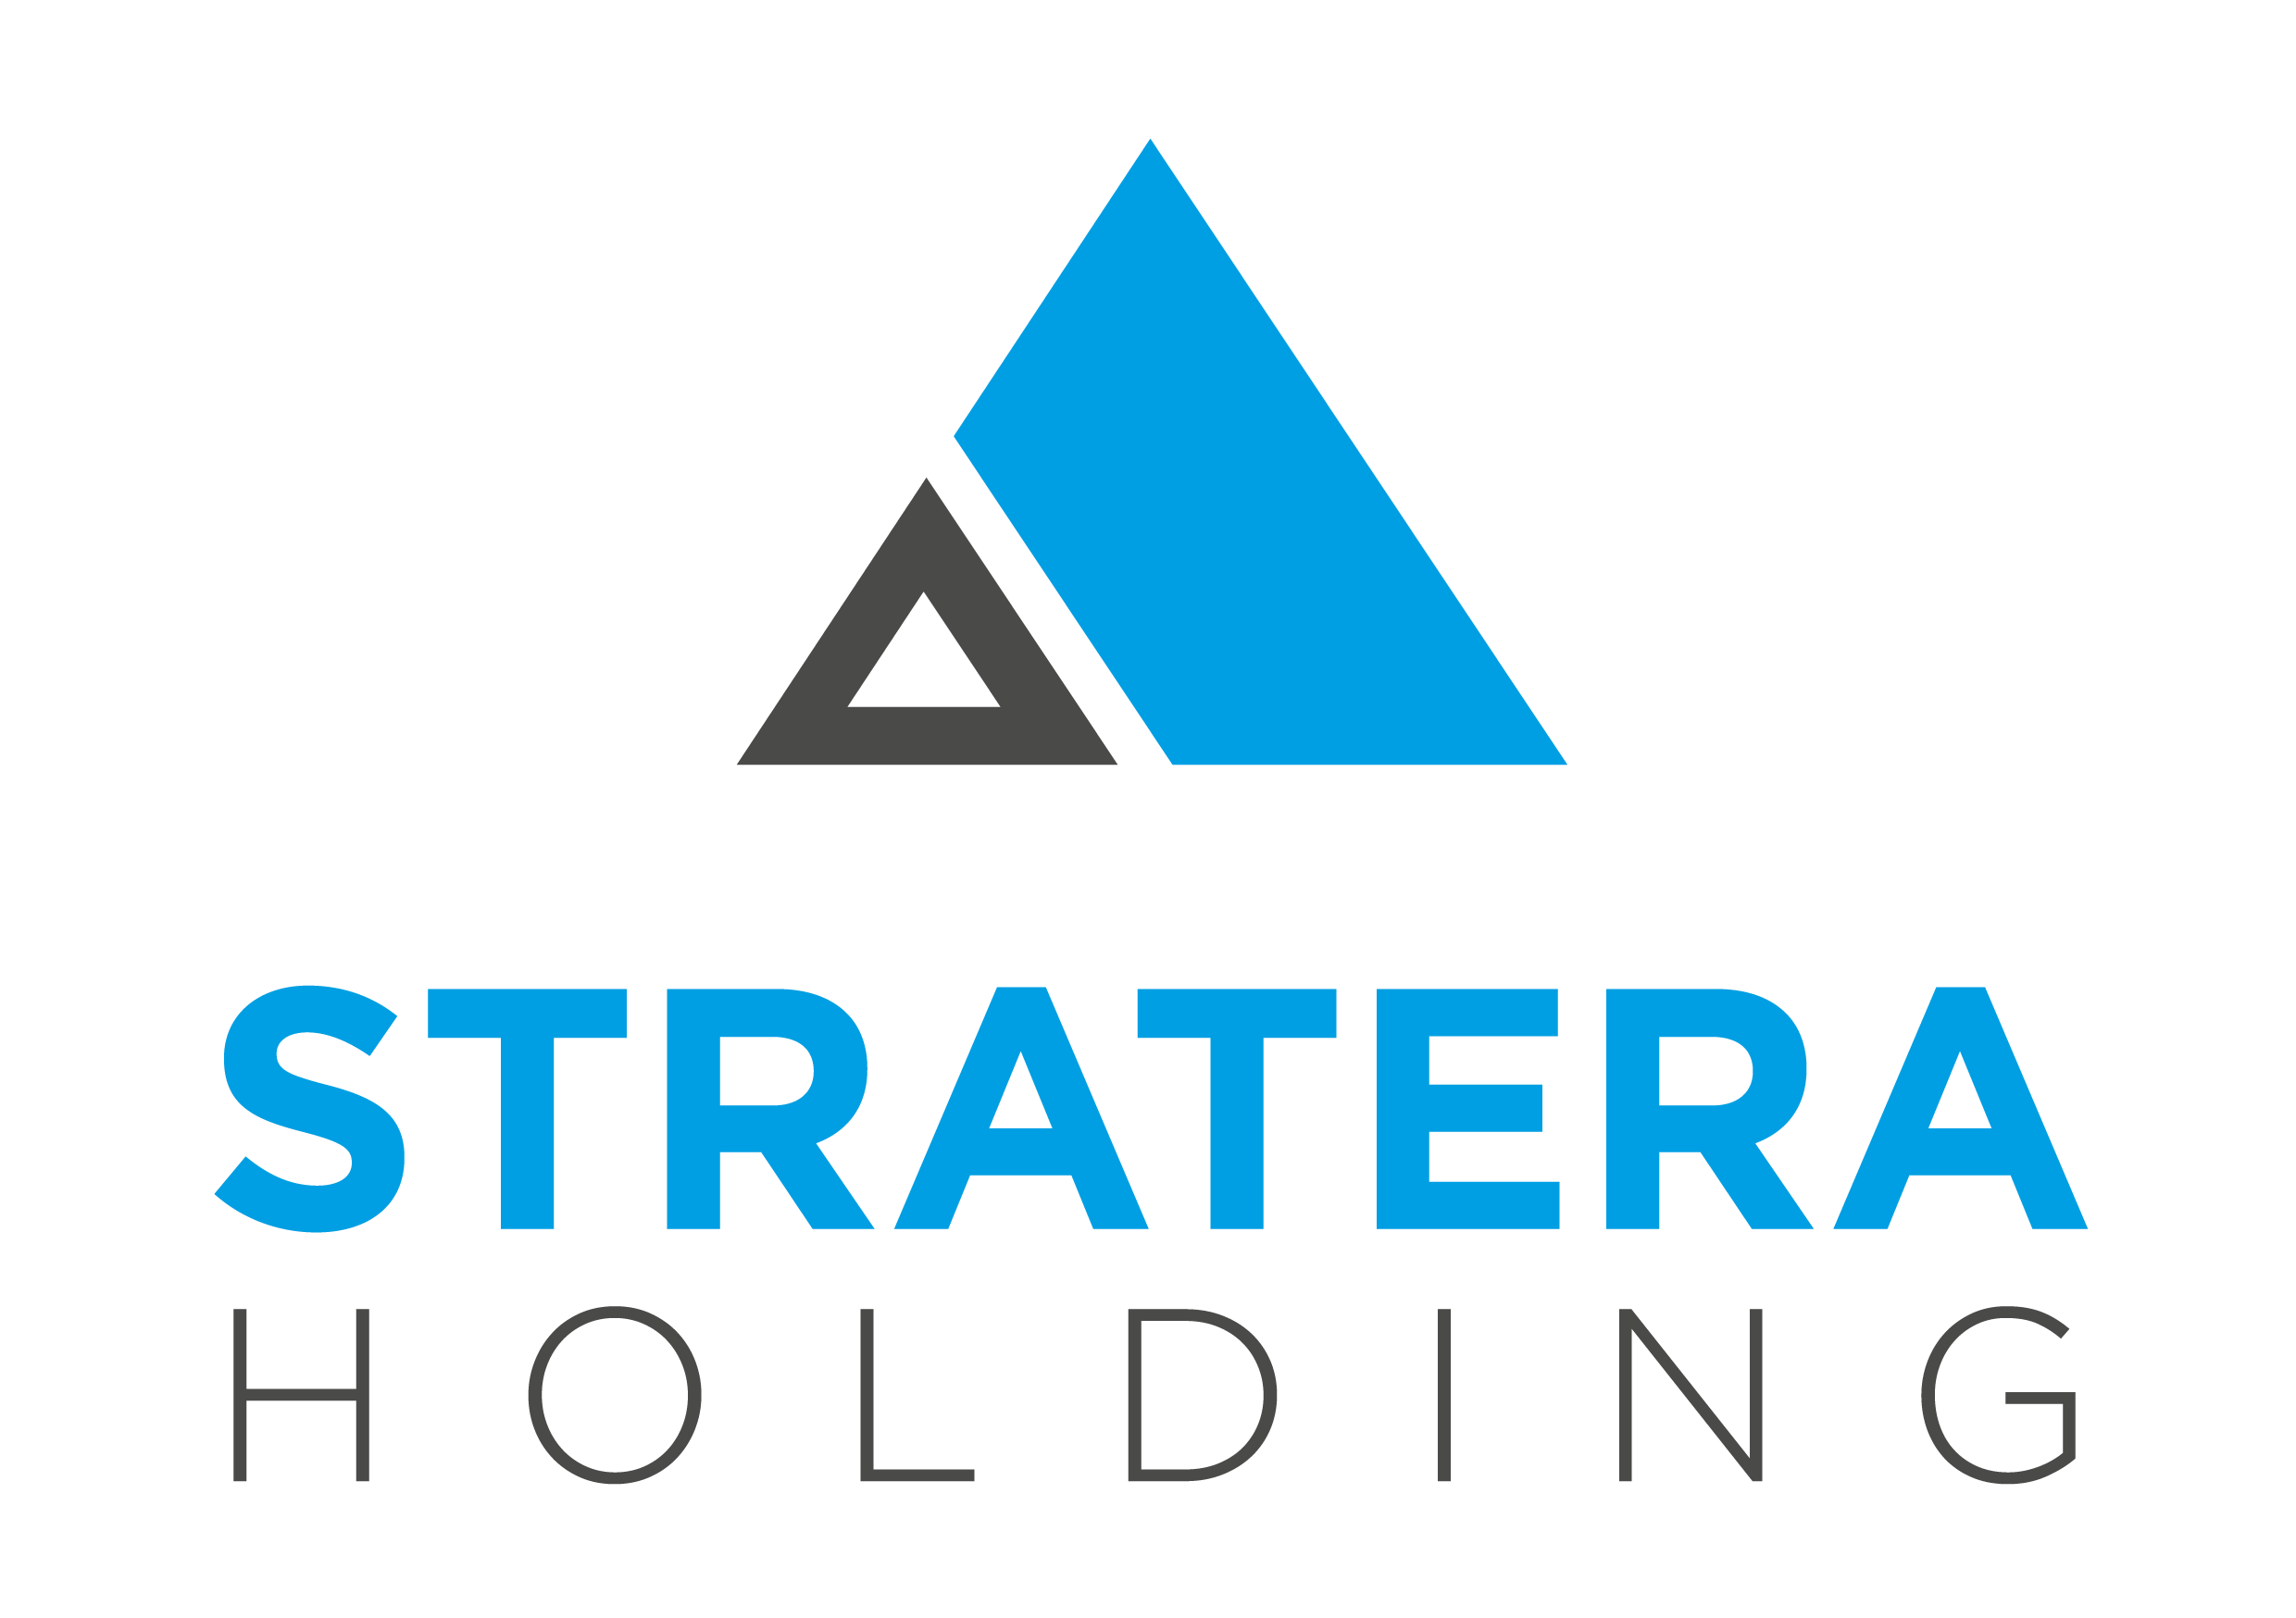 STRATERA HOLDING